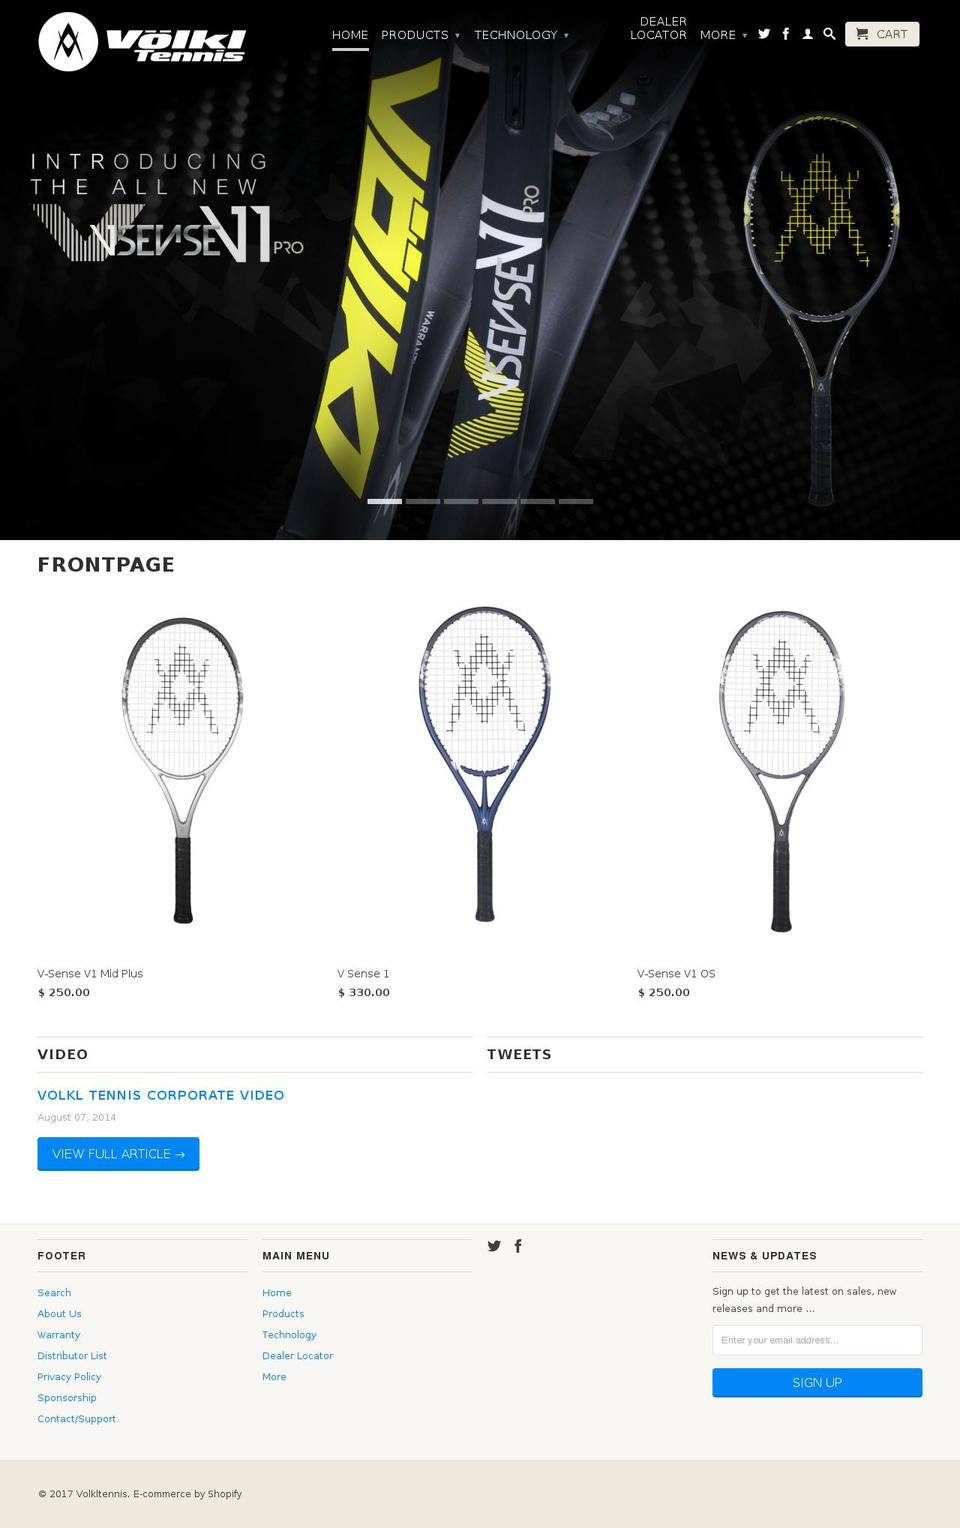 Focal Shopify theme site example volkltennis.com